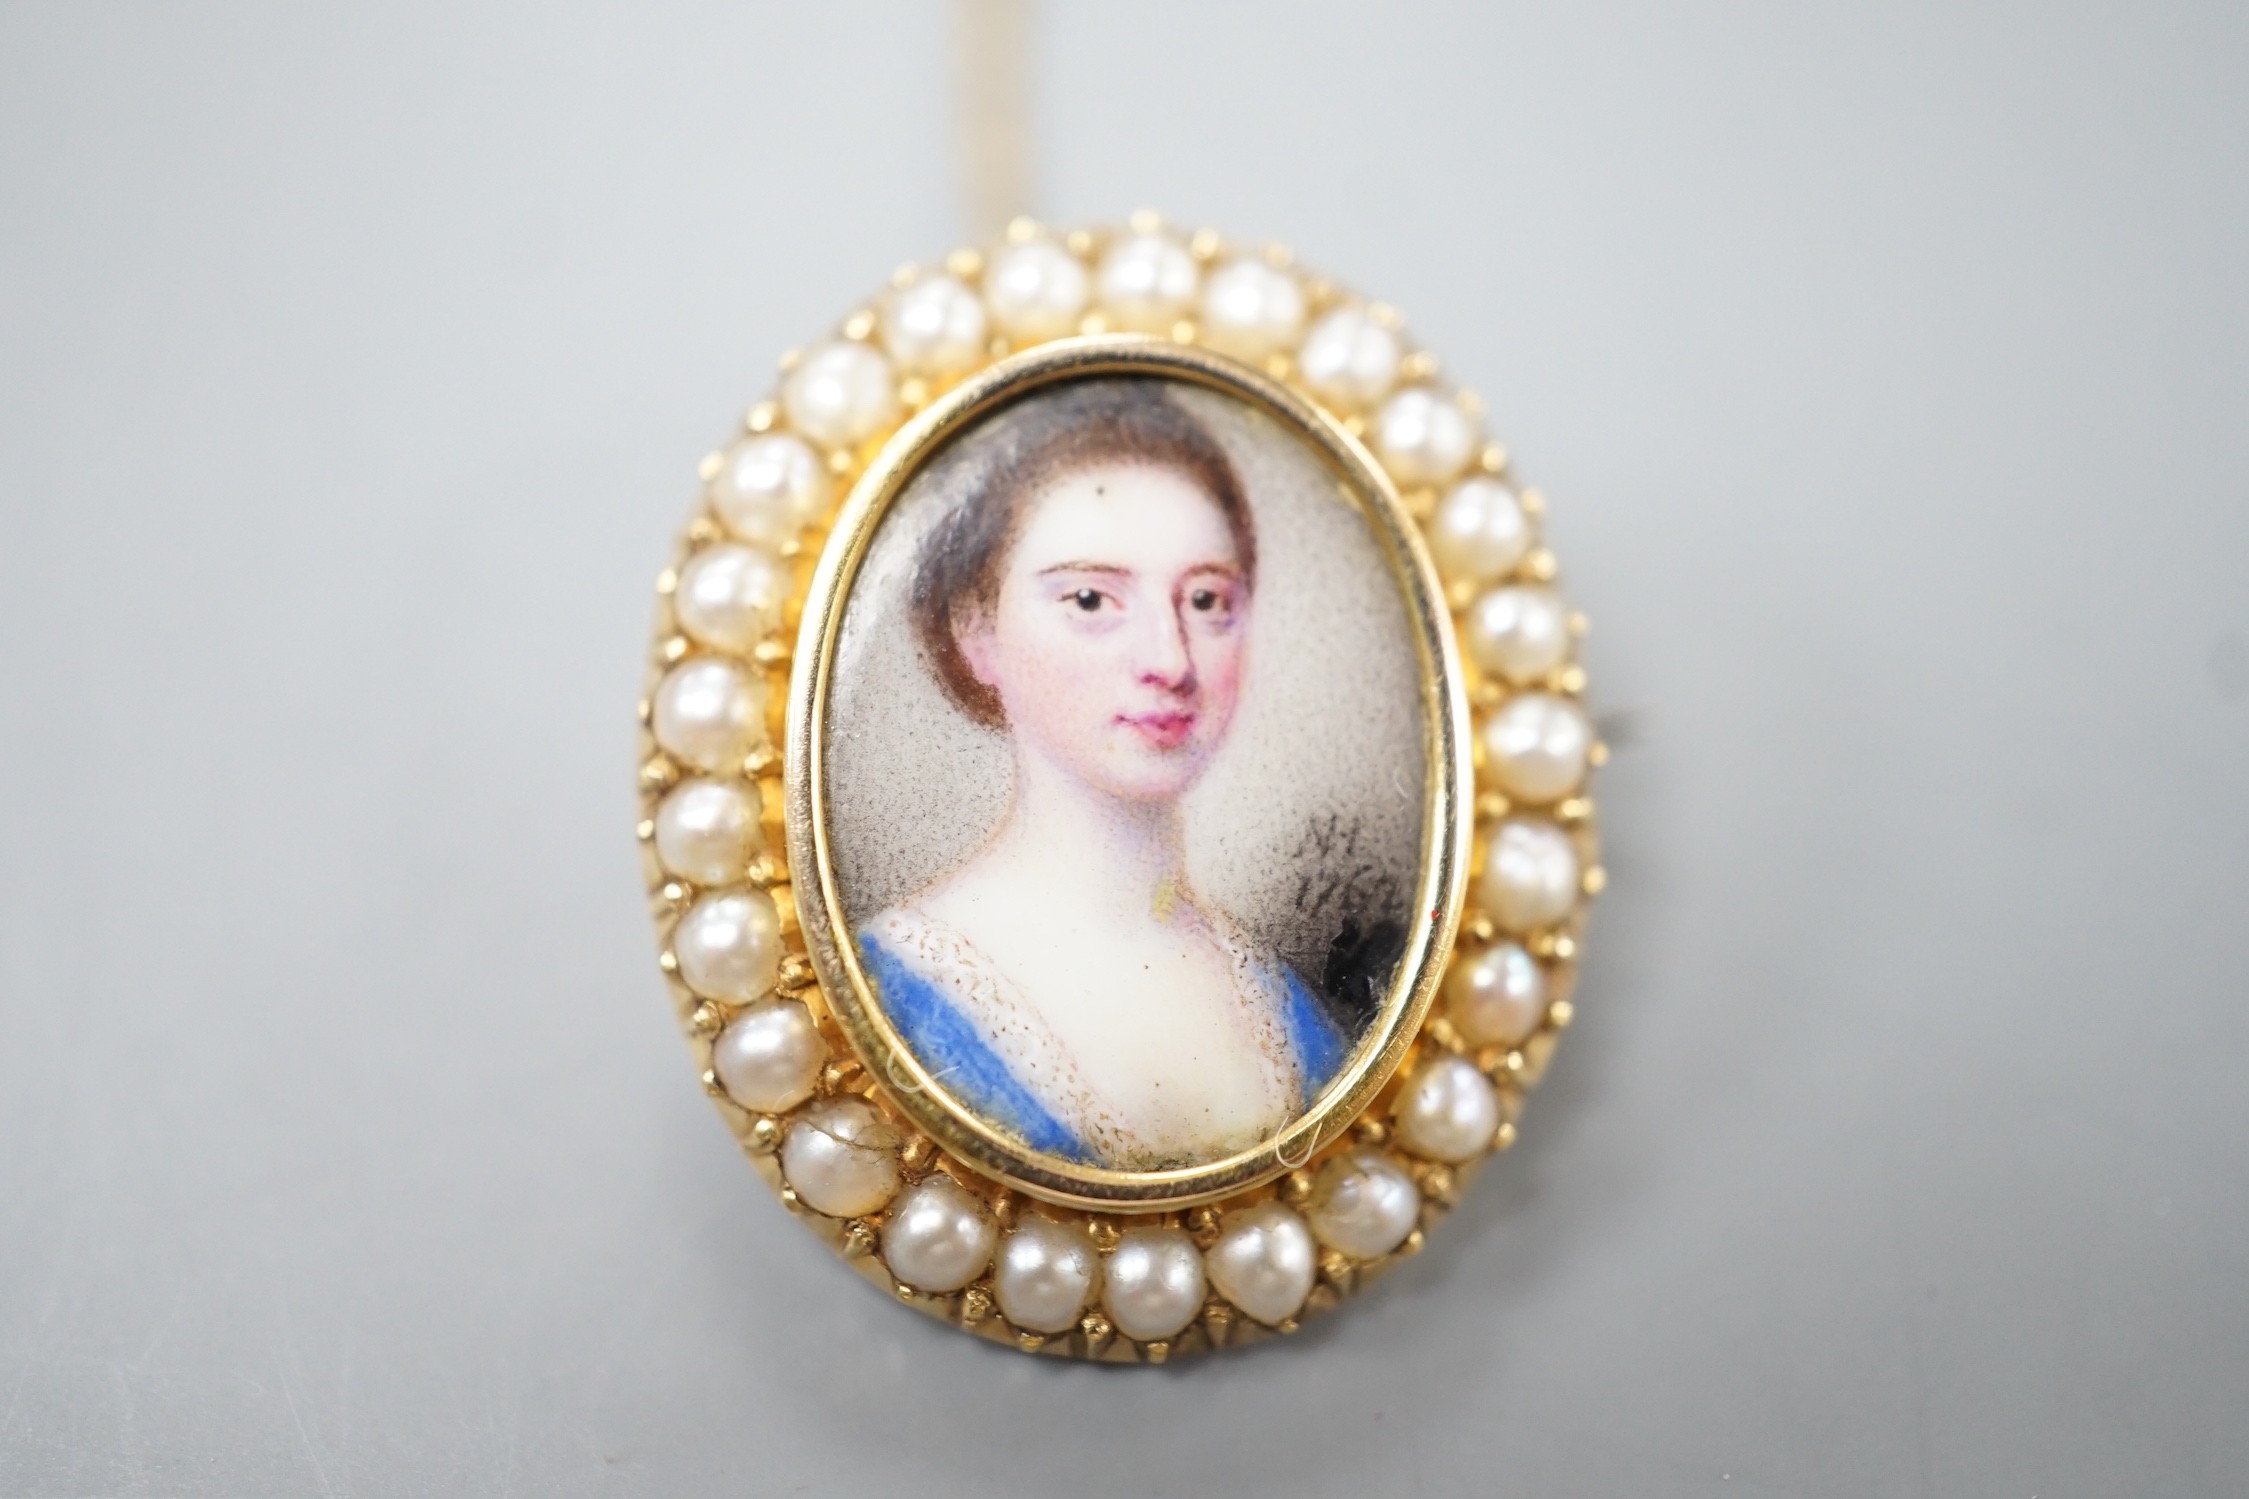 Attributed to Nathaniel Hone (1718-1784) a portrait miniature brooch, the 18th century inset enamel on copper portrait of a young lady mounted and backed in yellow metal, bordered in seed pearls, initialled and dated NH,